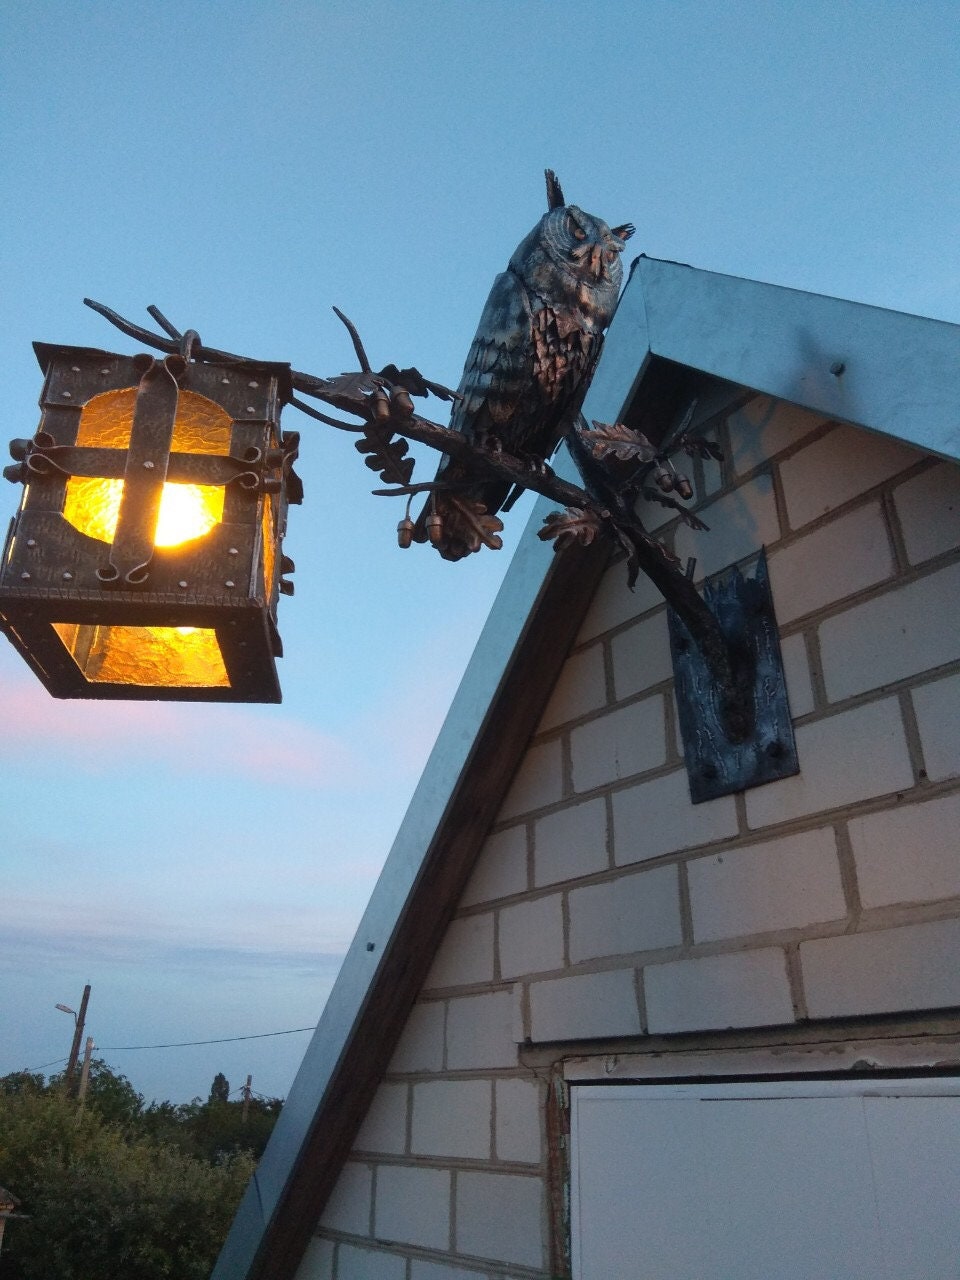 LED lamp, solar battery, wall sconce, outdoor sconce, outside sconce, owl, birthday, castle, medieval, cottage, midcentury, anniversary,bird